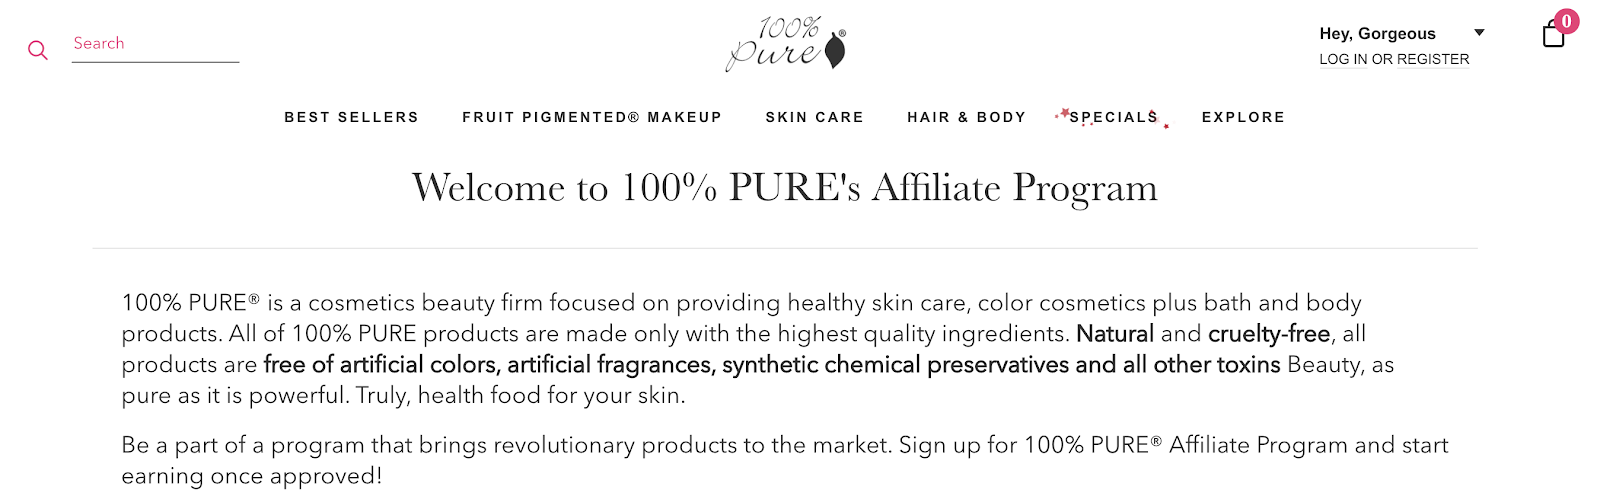 100% Pure Beauty and Makeup Affiliate Program for Bloggers